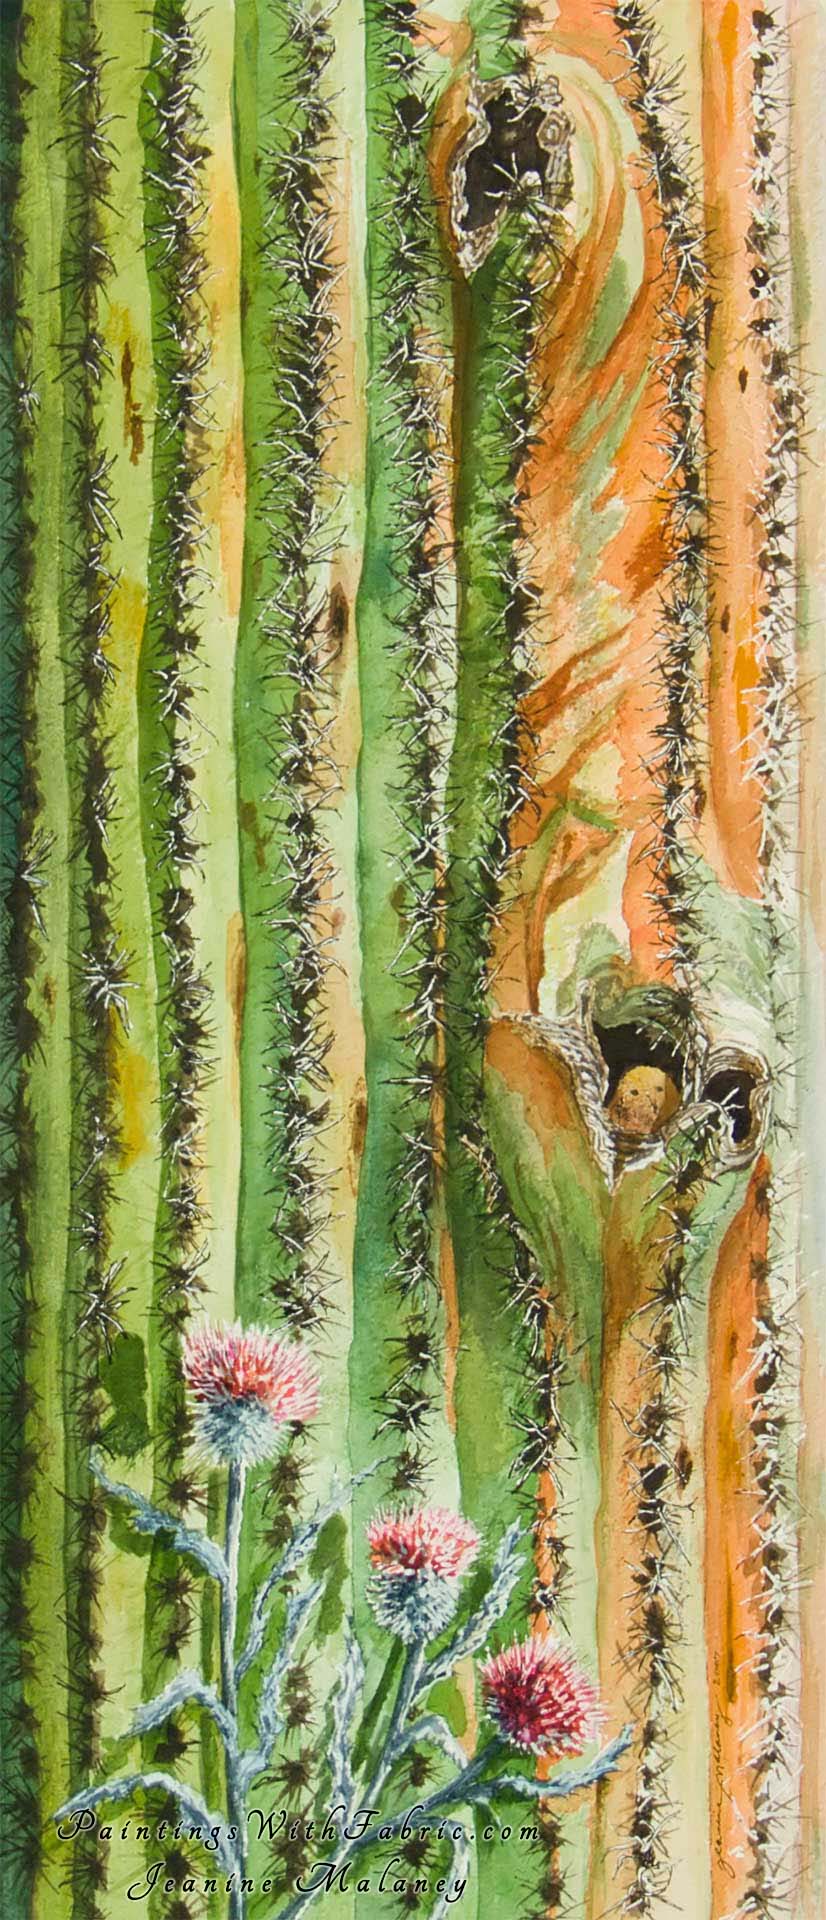 Saguaro Home Unframed Original Watercolor Painting of a closeup of a Saguaro with a Cactus wren in it